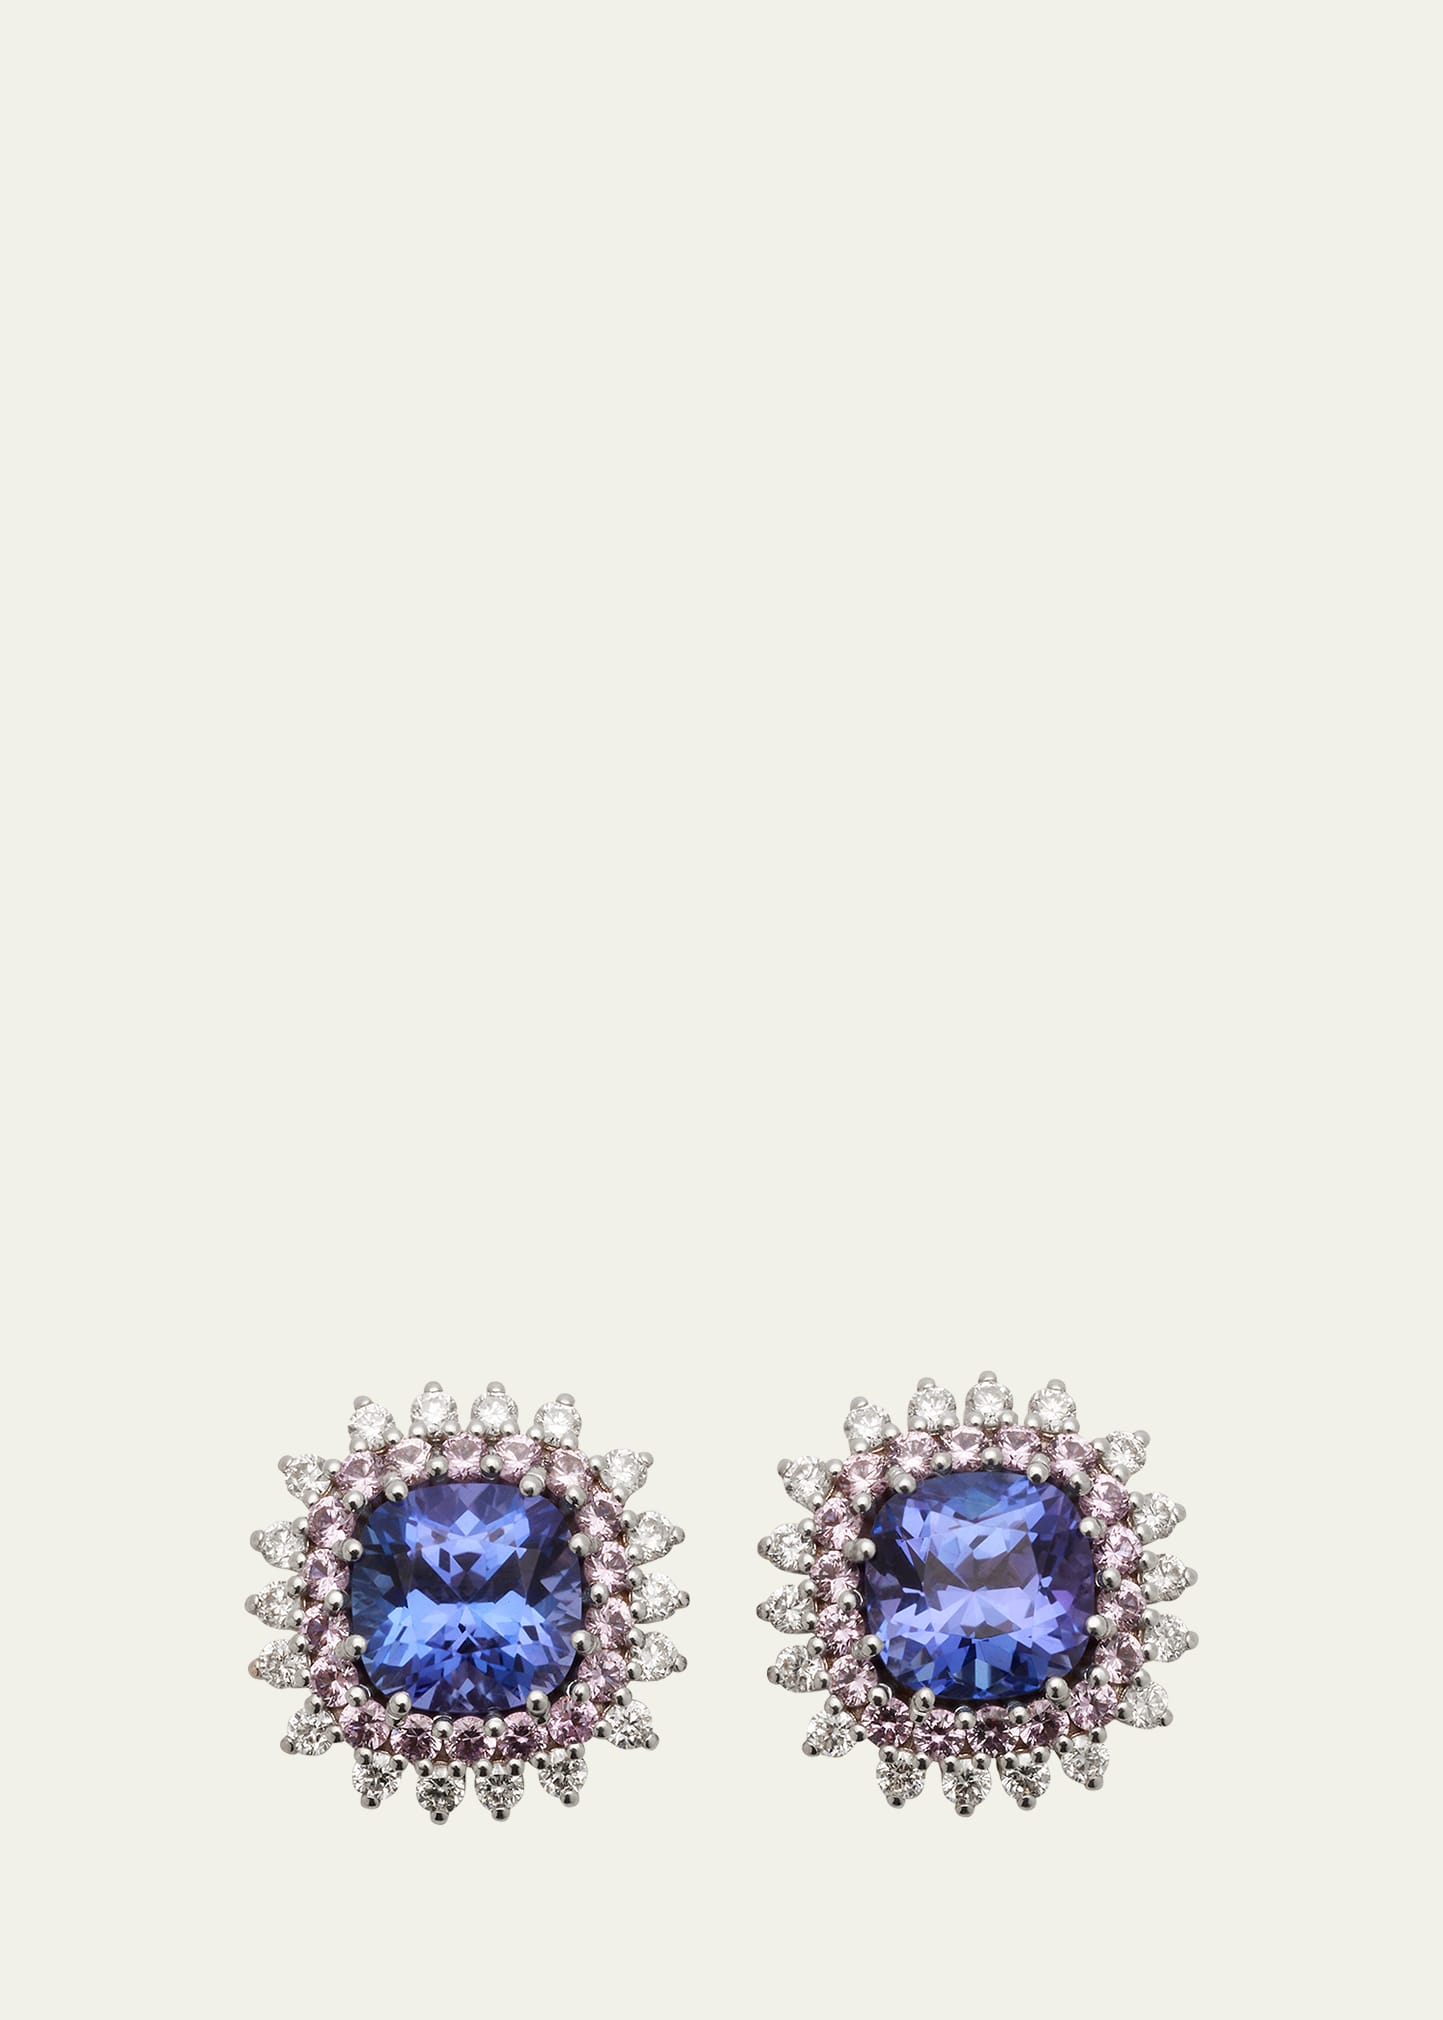 White Gold Pinpoint Stud Earrings with Diamond and Tanzanite